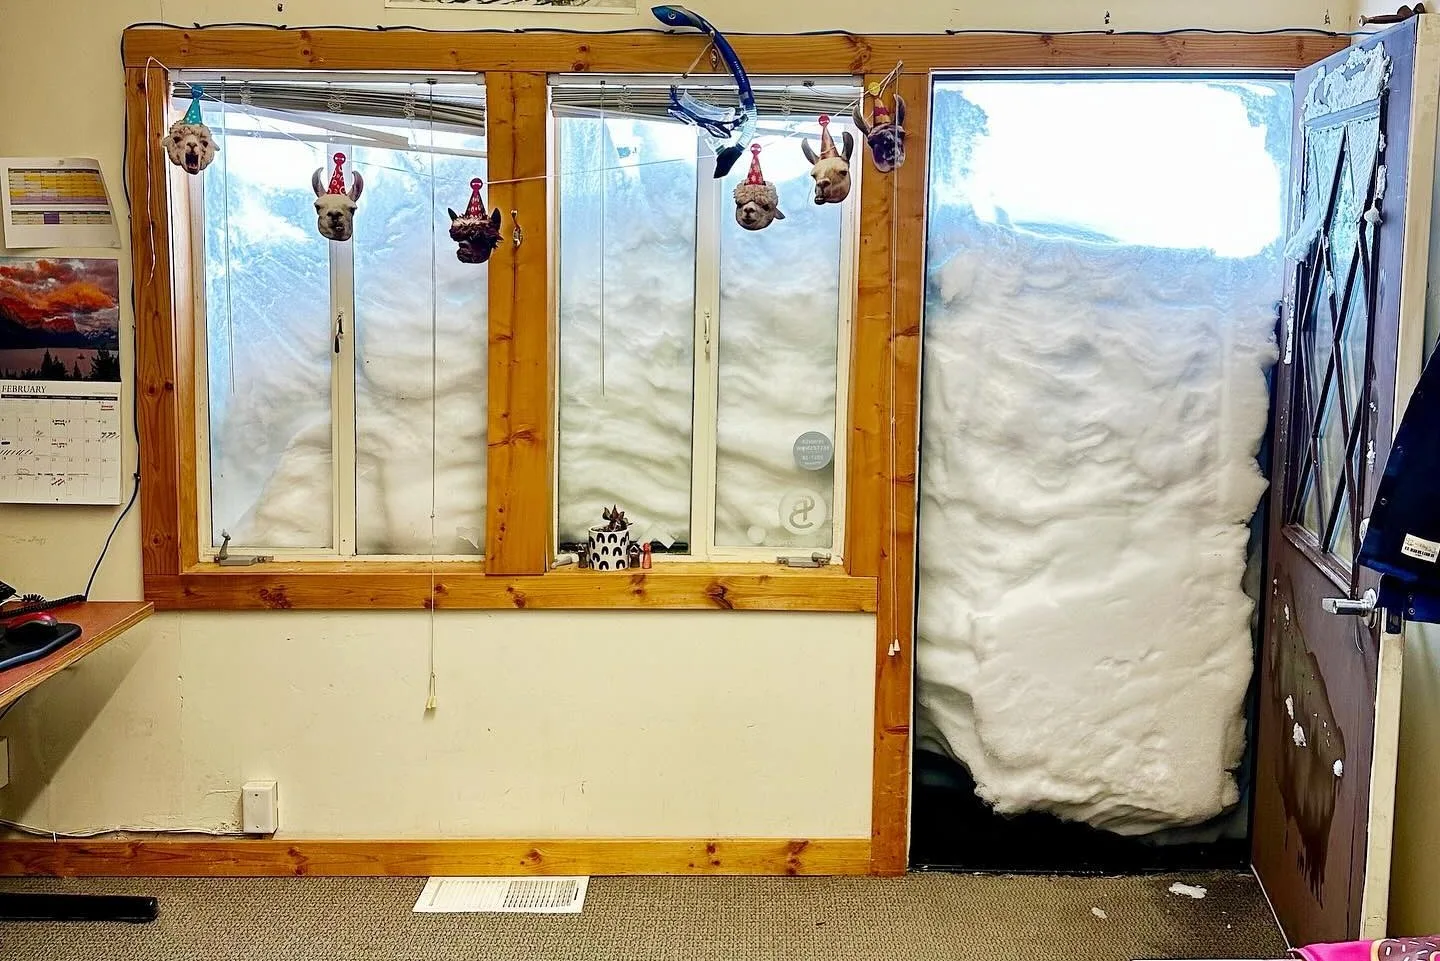 A worker at Sugar Bowl Resort in Norden, near Sacramento, California, encountered a wall of snow on the second floor after a two-foot overnight storm.